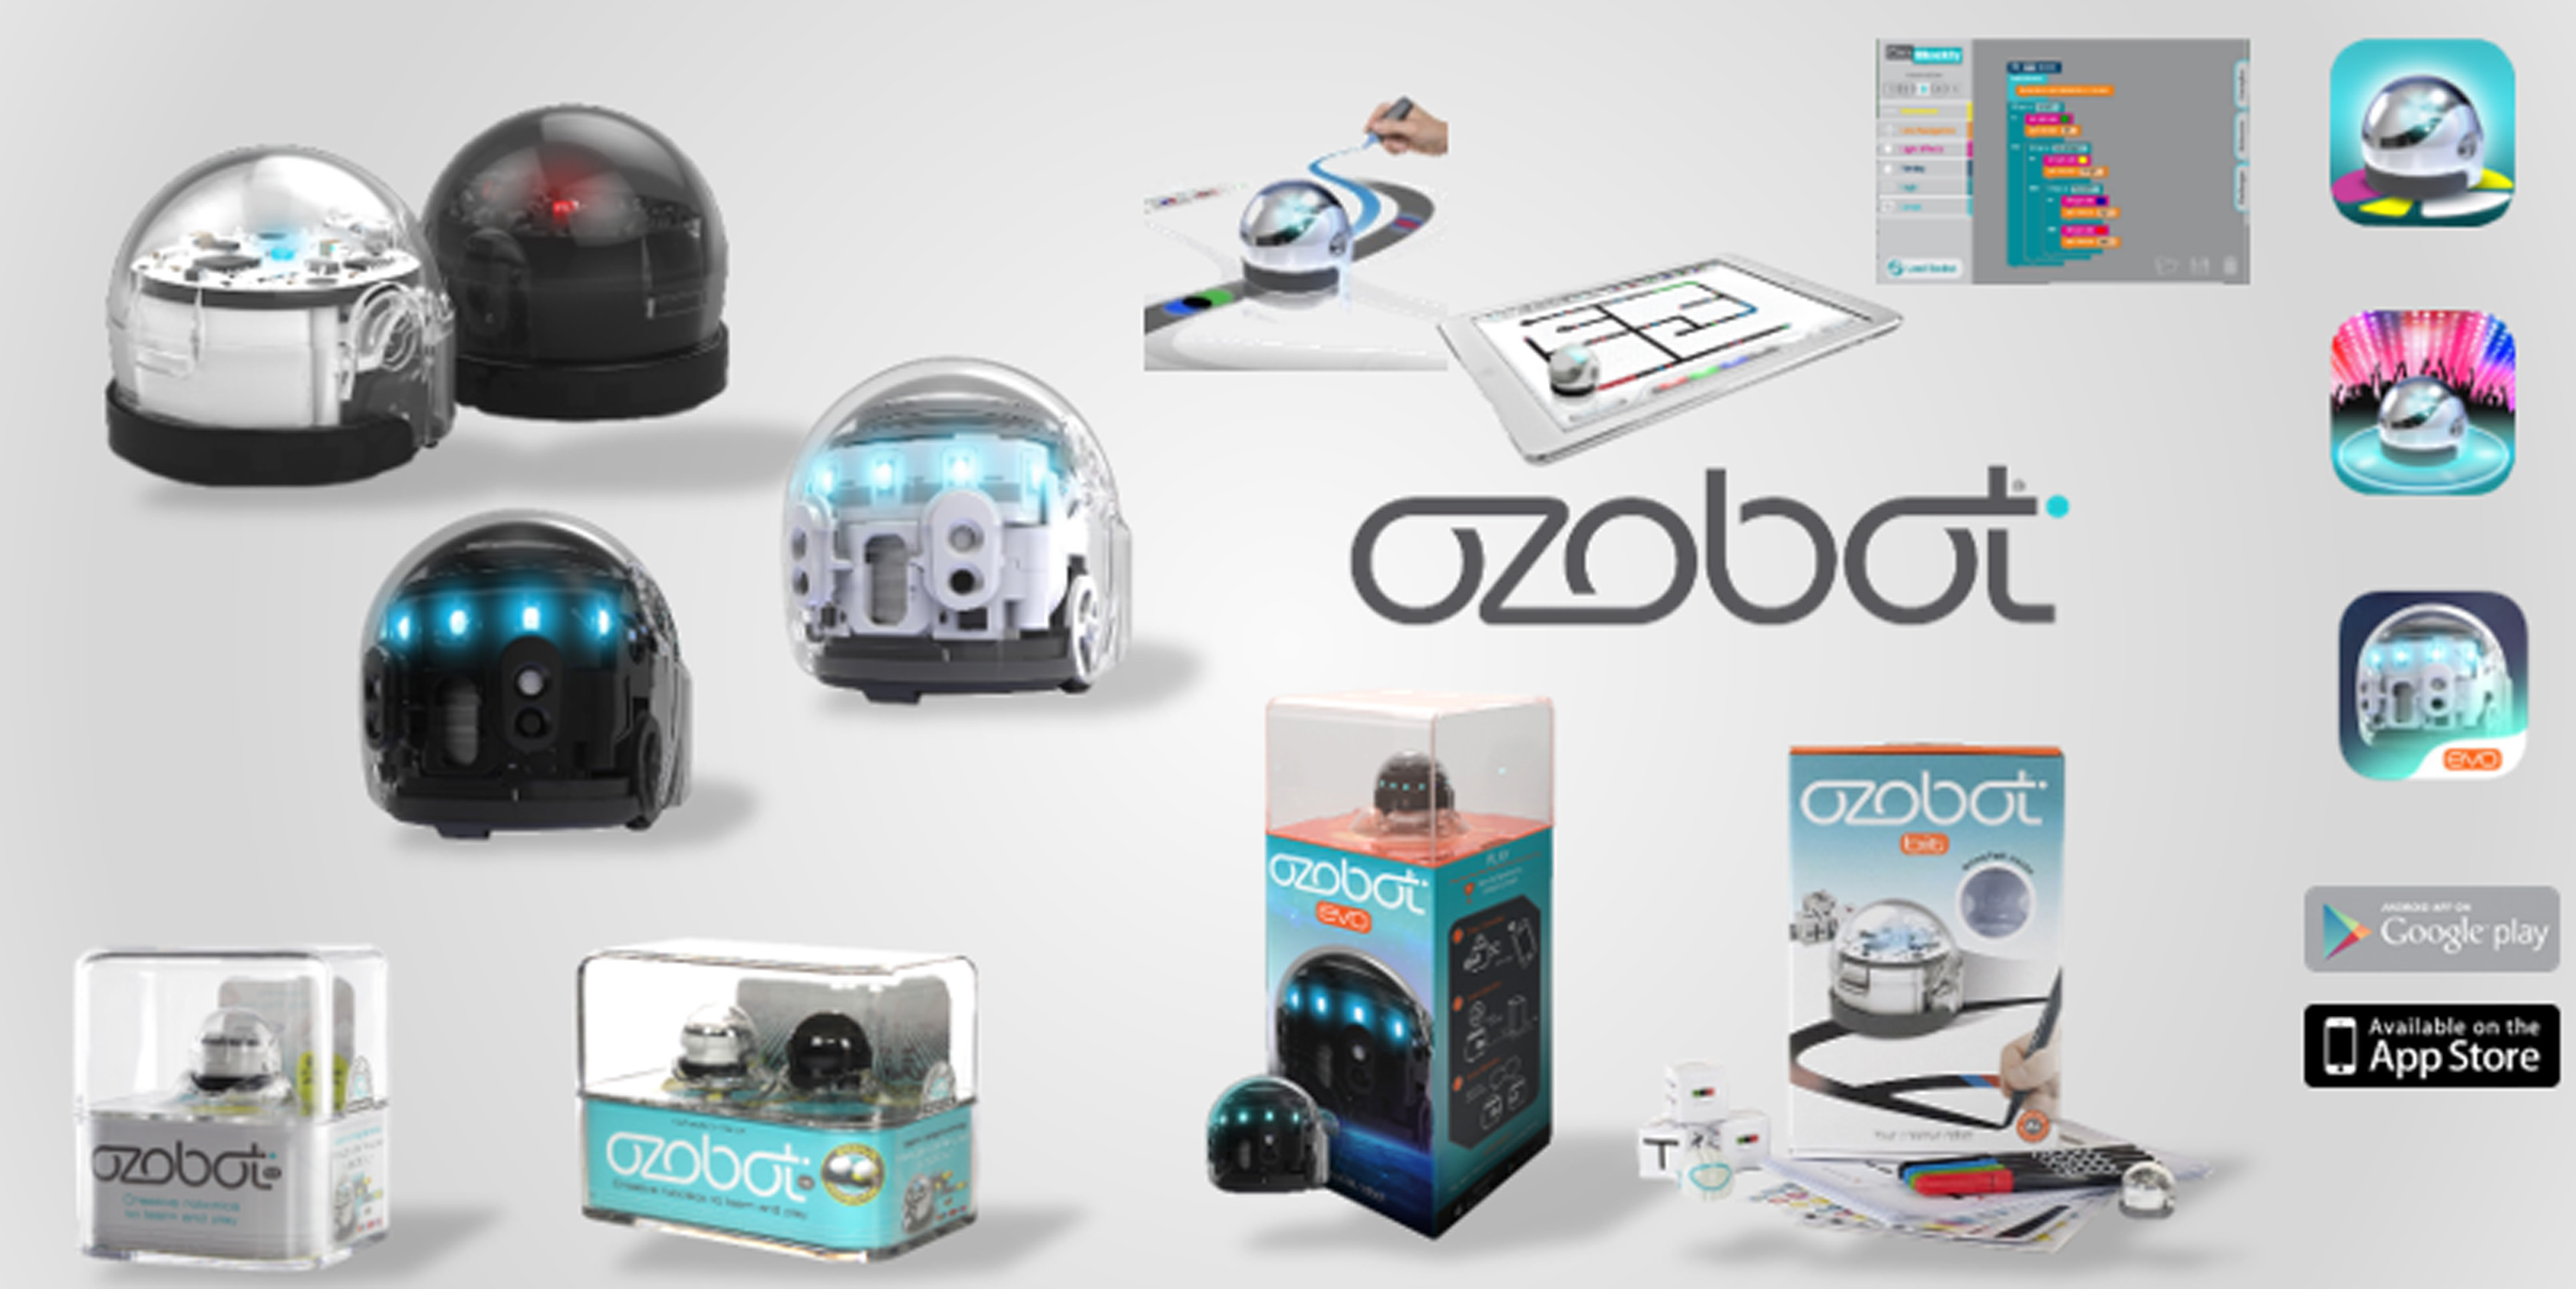 Ozobot Gamme